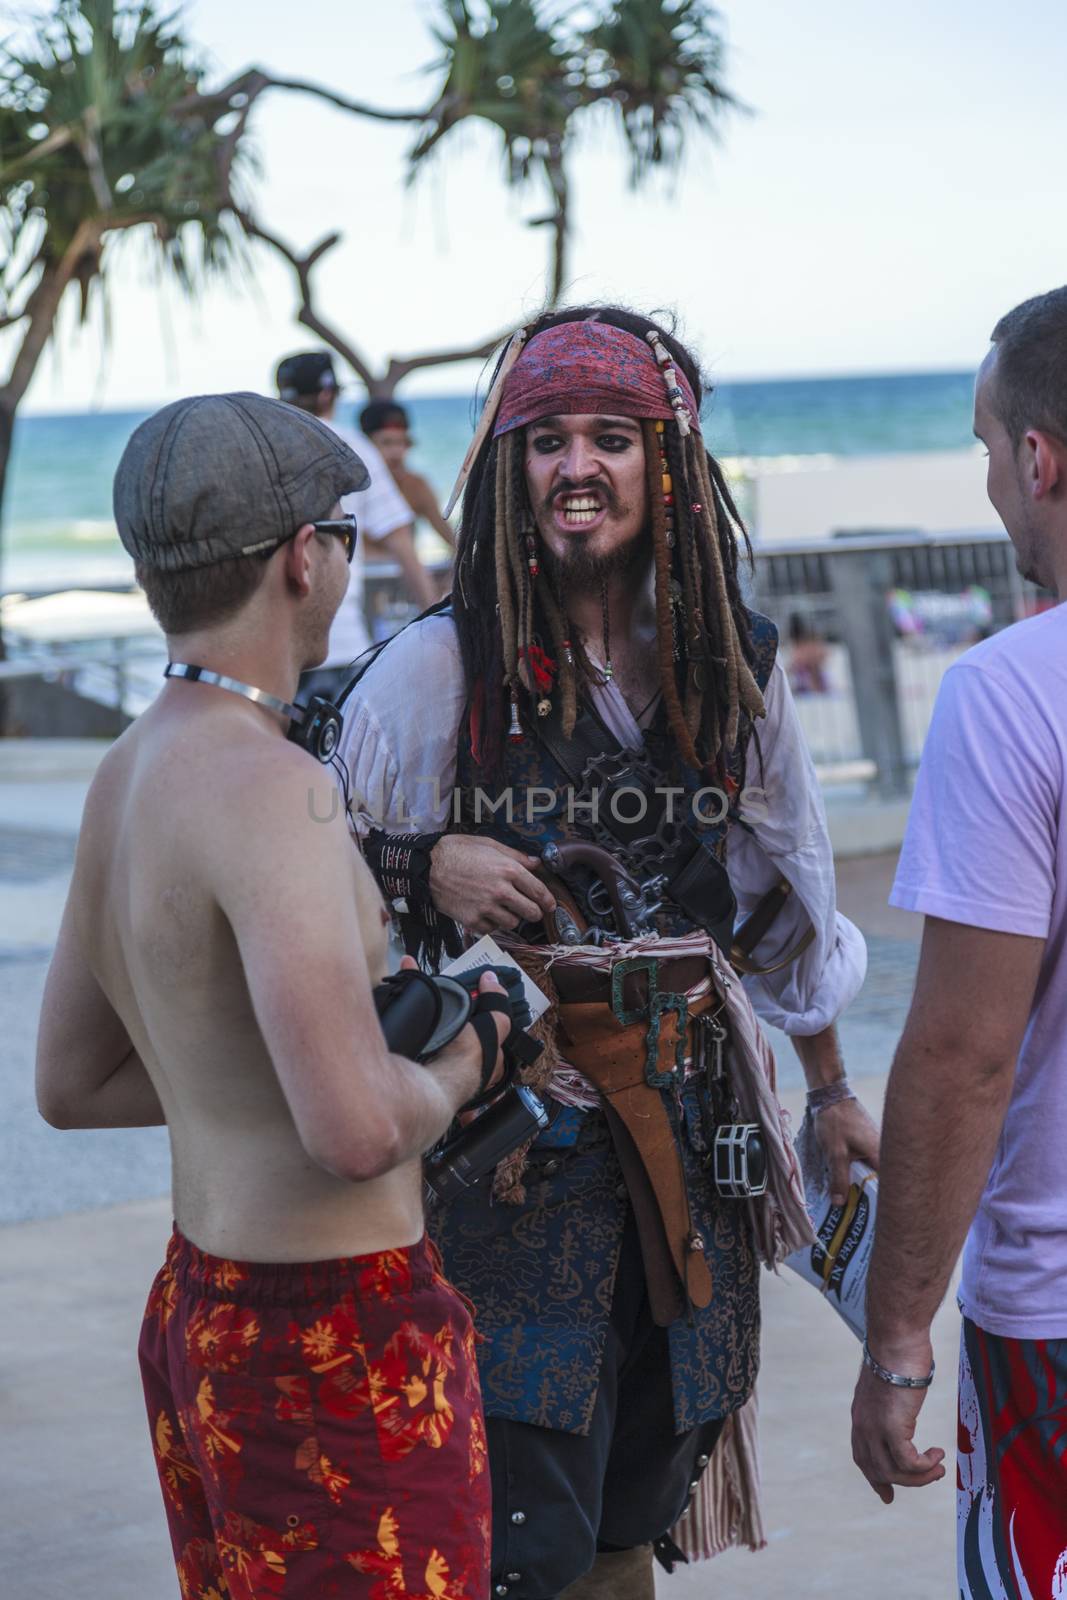 Pirates of the Caribbean by Imagecom